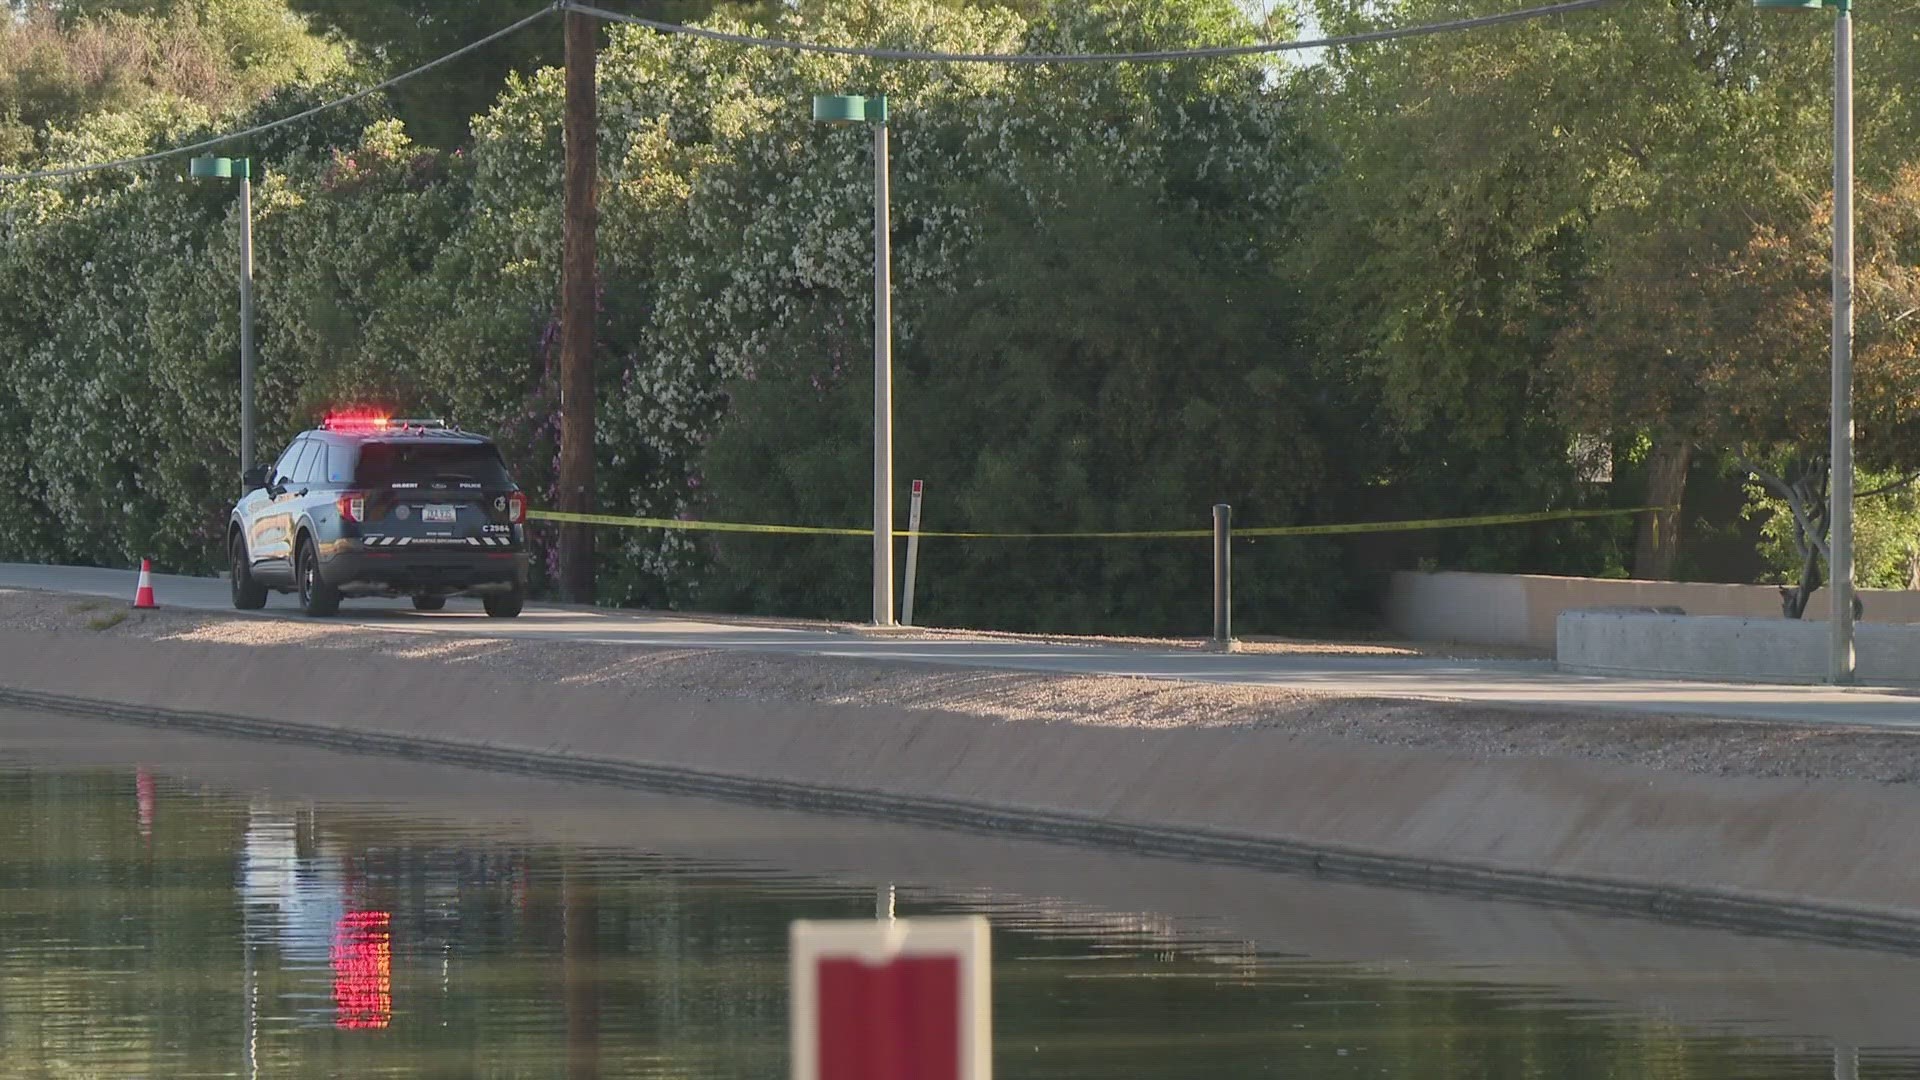 The body of a man was found in a canal in Gilbert, Arizona, and police are investigating his death as suspicious. Watch the video above for more information.